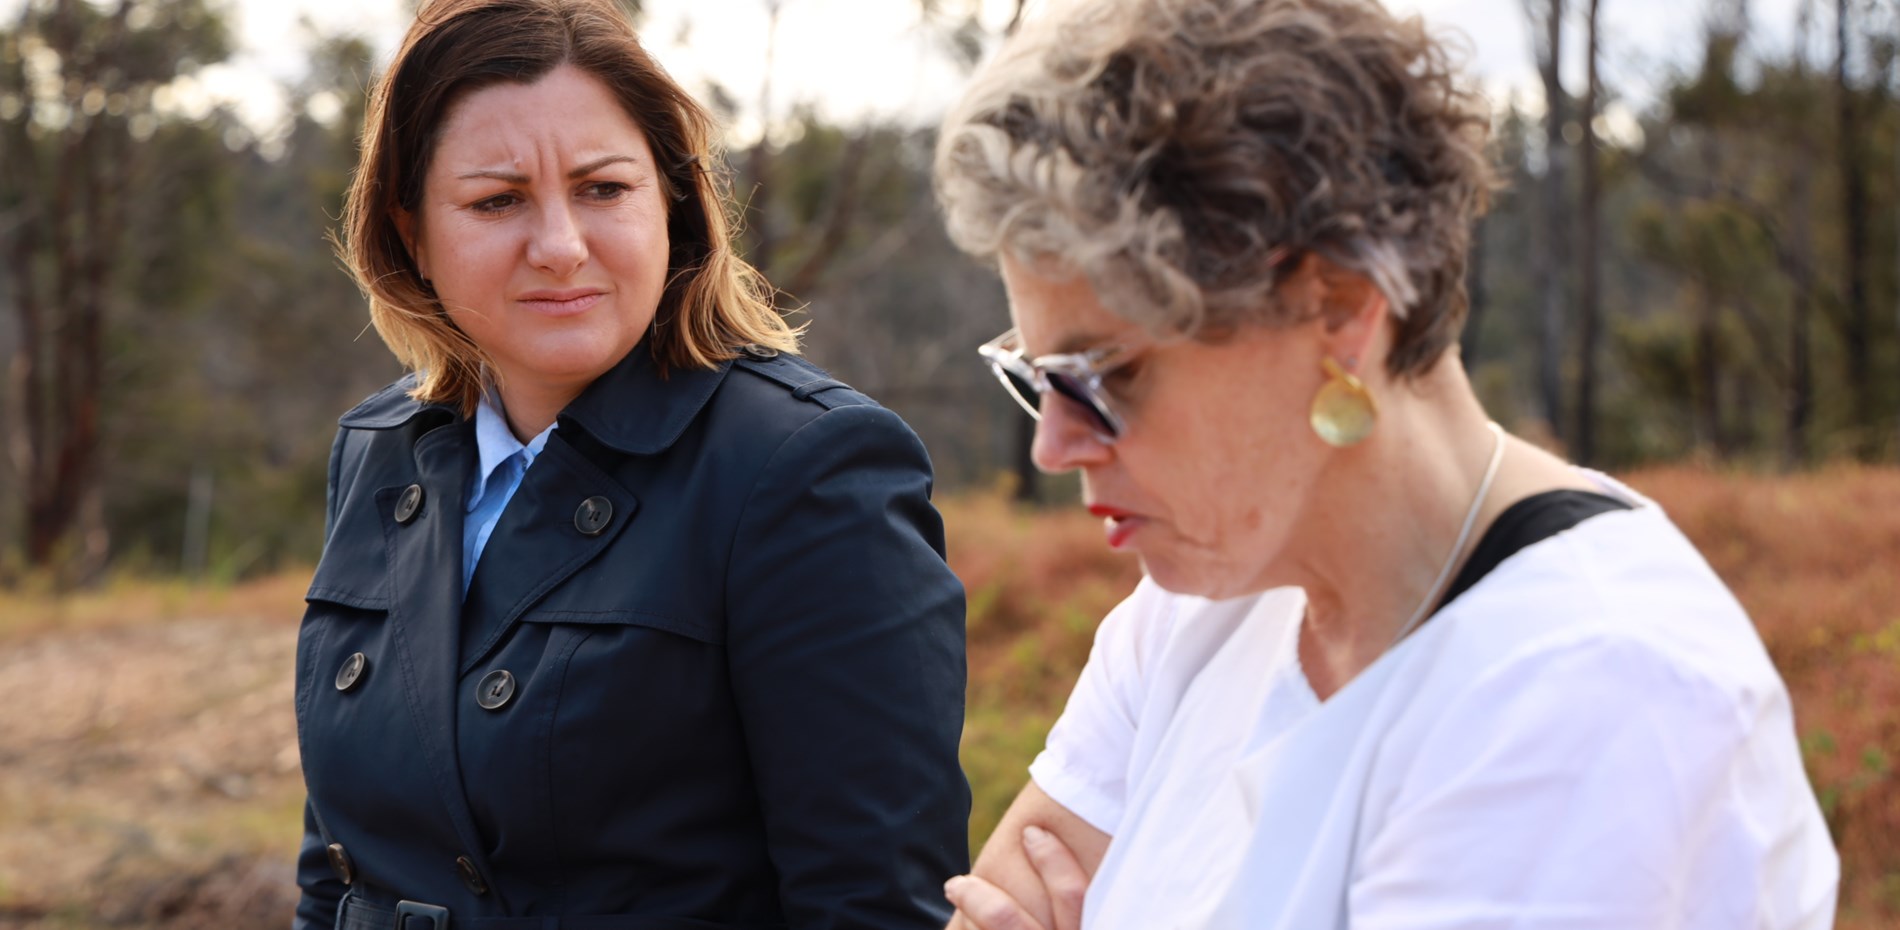 Labor calls on government again to extend HomeBuilder to help bushfire survivors Main Image